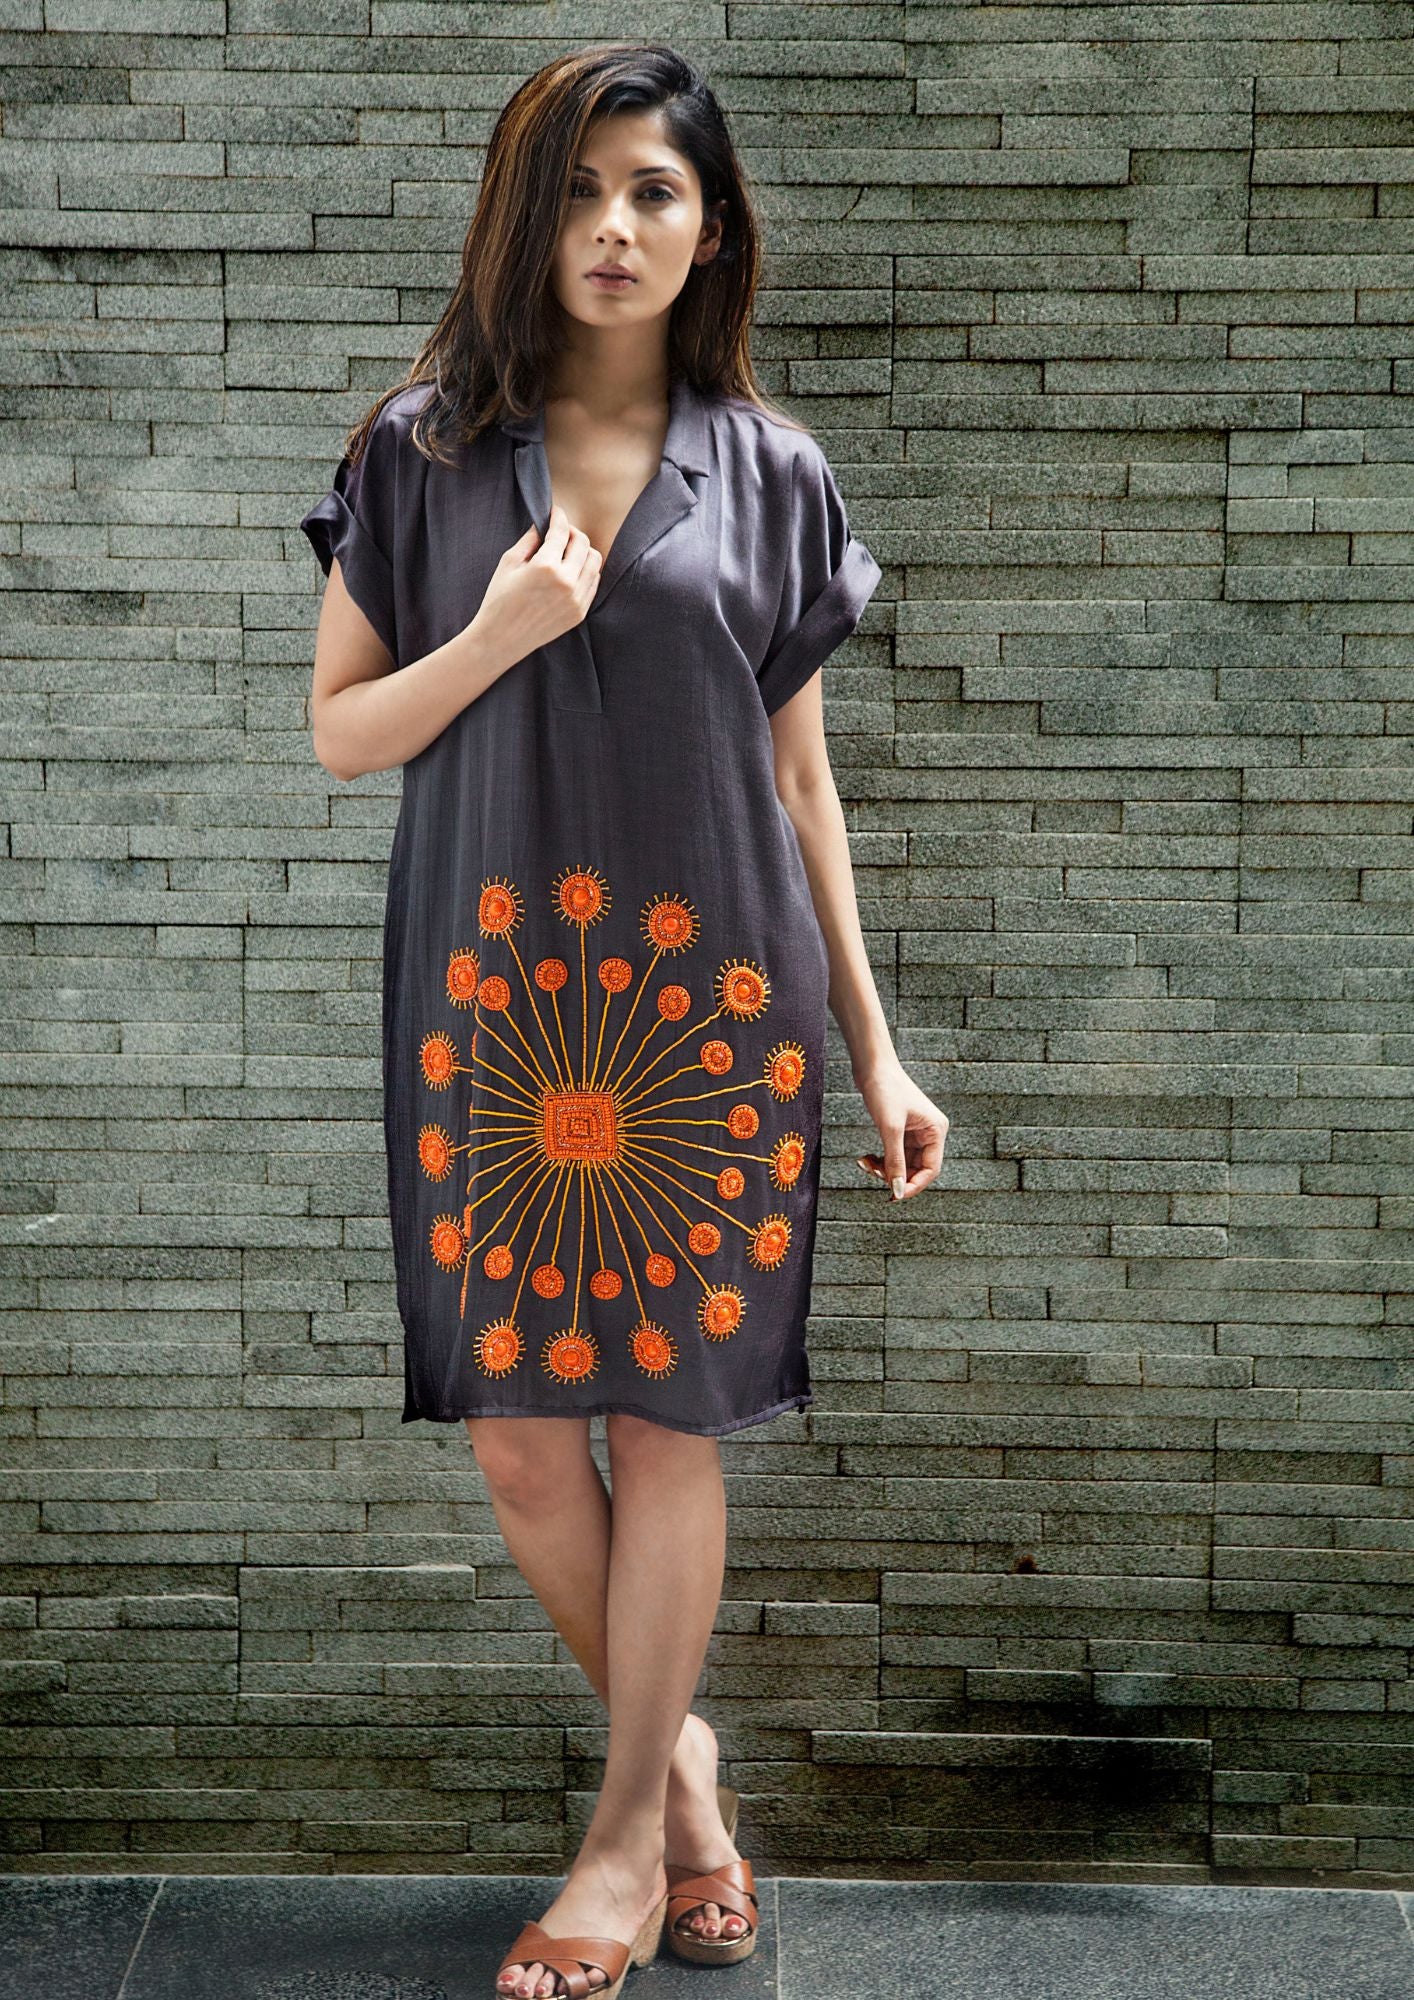 Charcoal grey shirt dress with bead work detailing